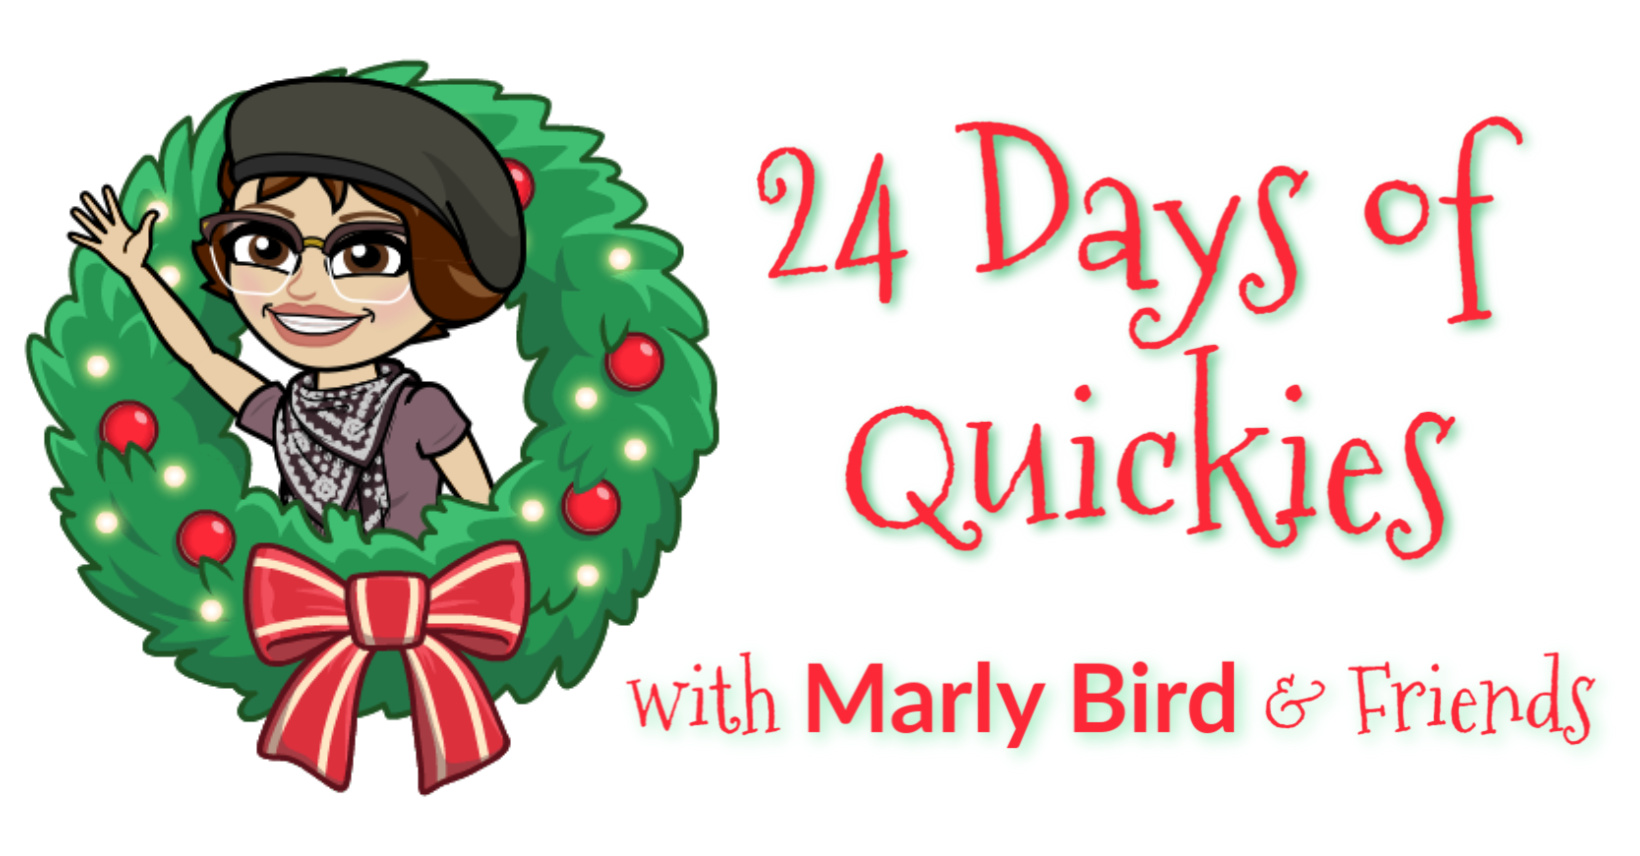 Illustration featuring a cartoon character resembling a woman wearing a beanie inside a Christmas wreath labeled "24 Days of Quickies with Marly Bird & Friends. -Marly Bird